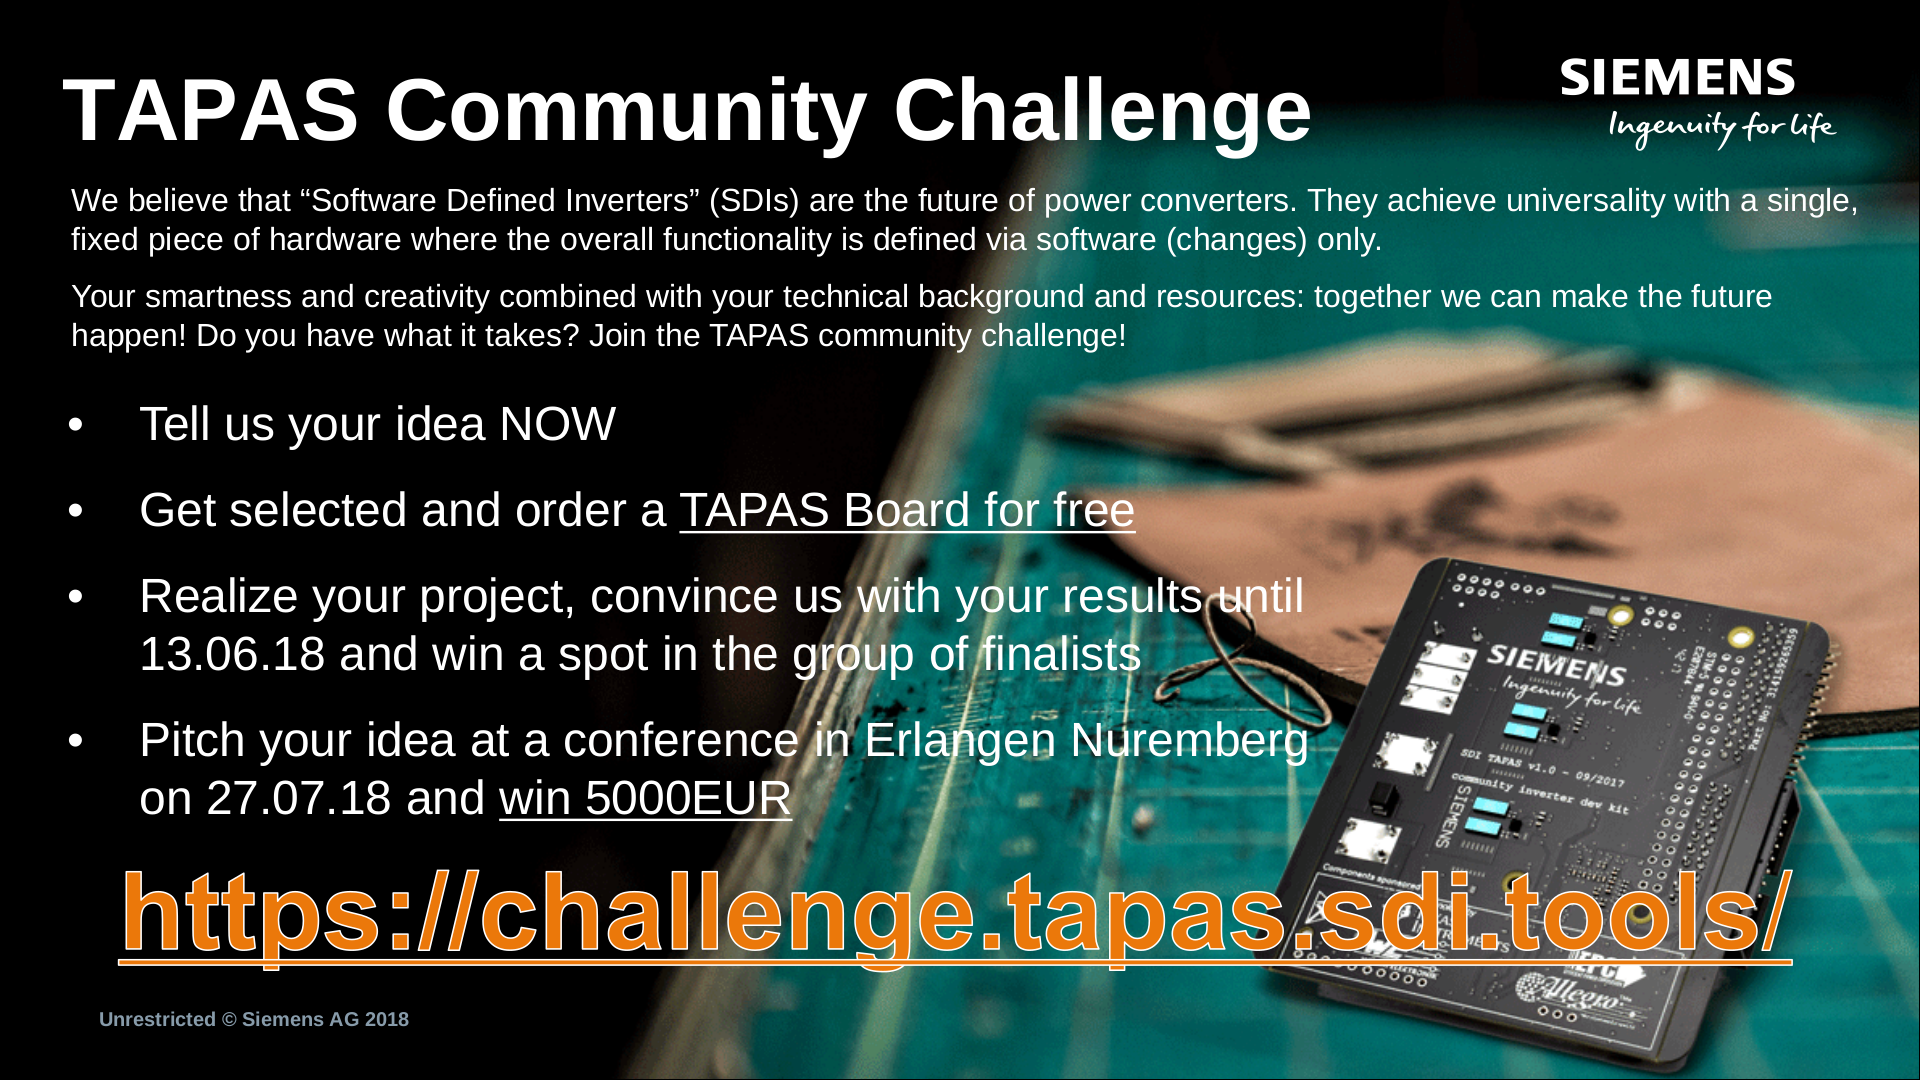 Towards entry "FAU’s CKI and Siemens present the TAPAS Community Challenge"